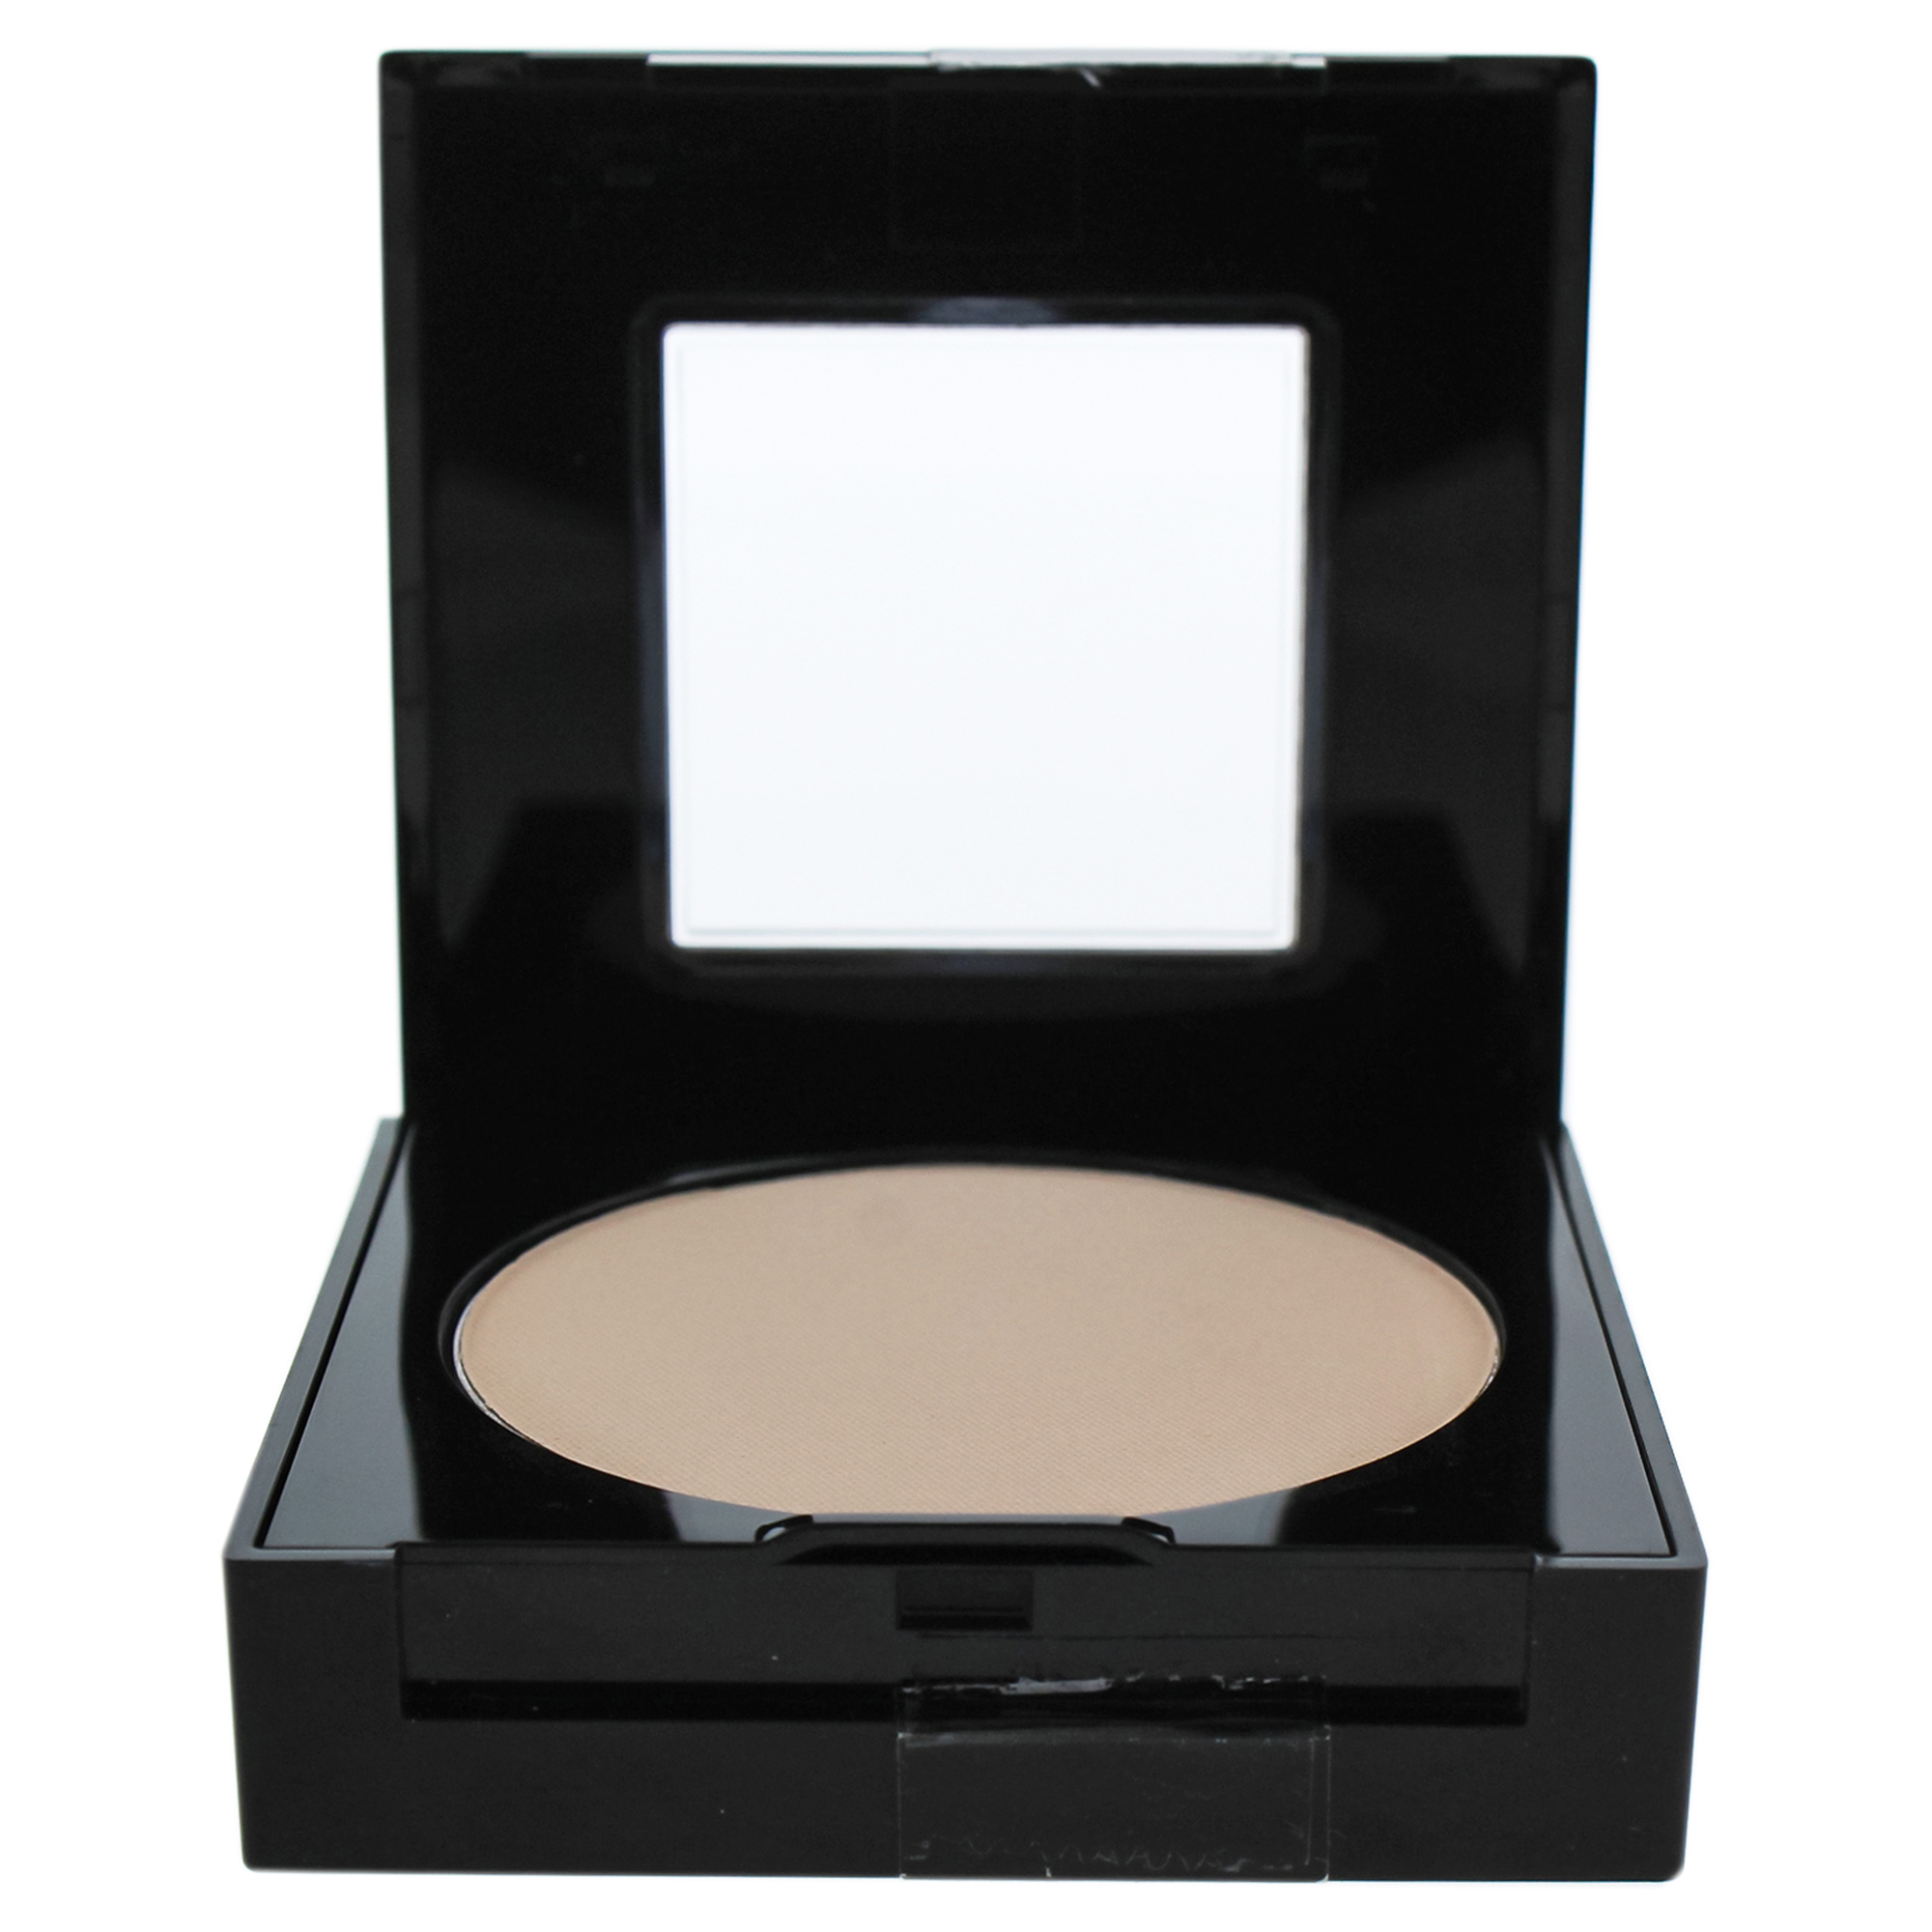 Maybelline Fit Me Set + Smooth Powder, Classic Ivory - image 2 of 2